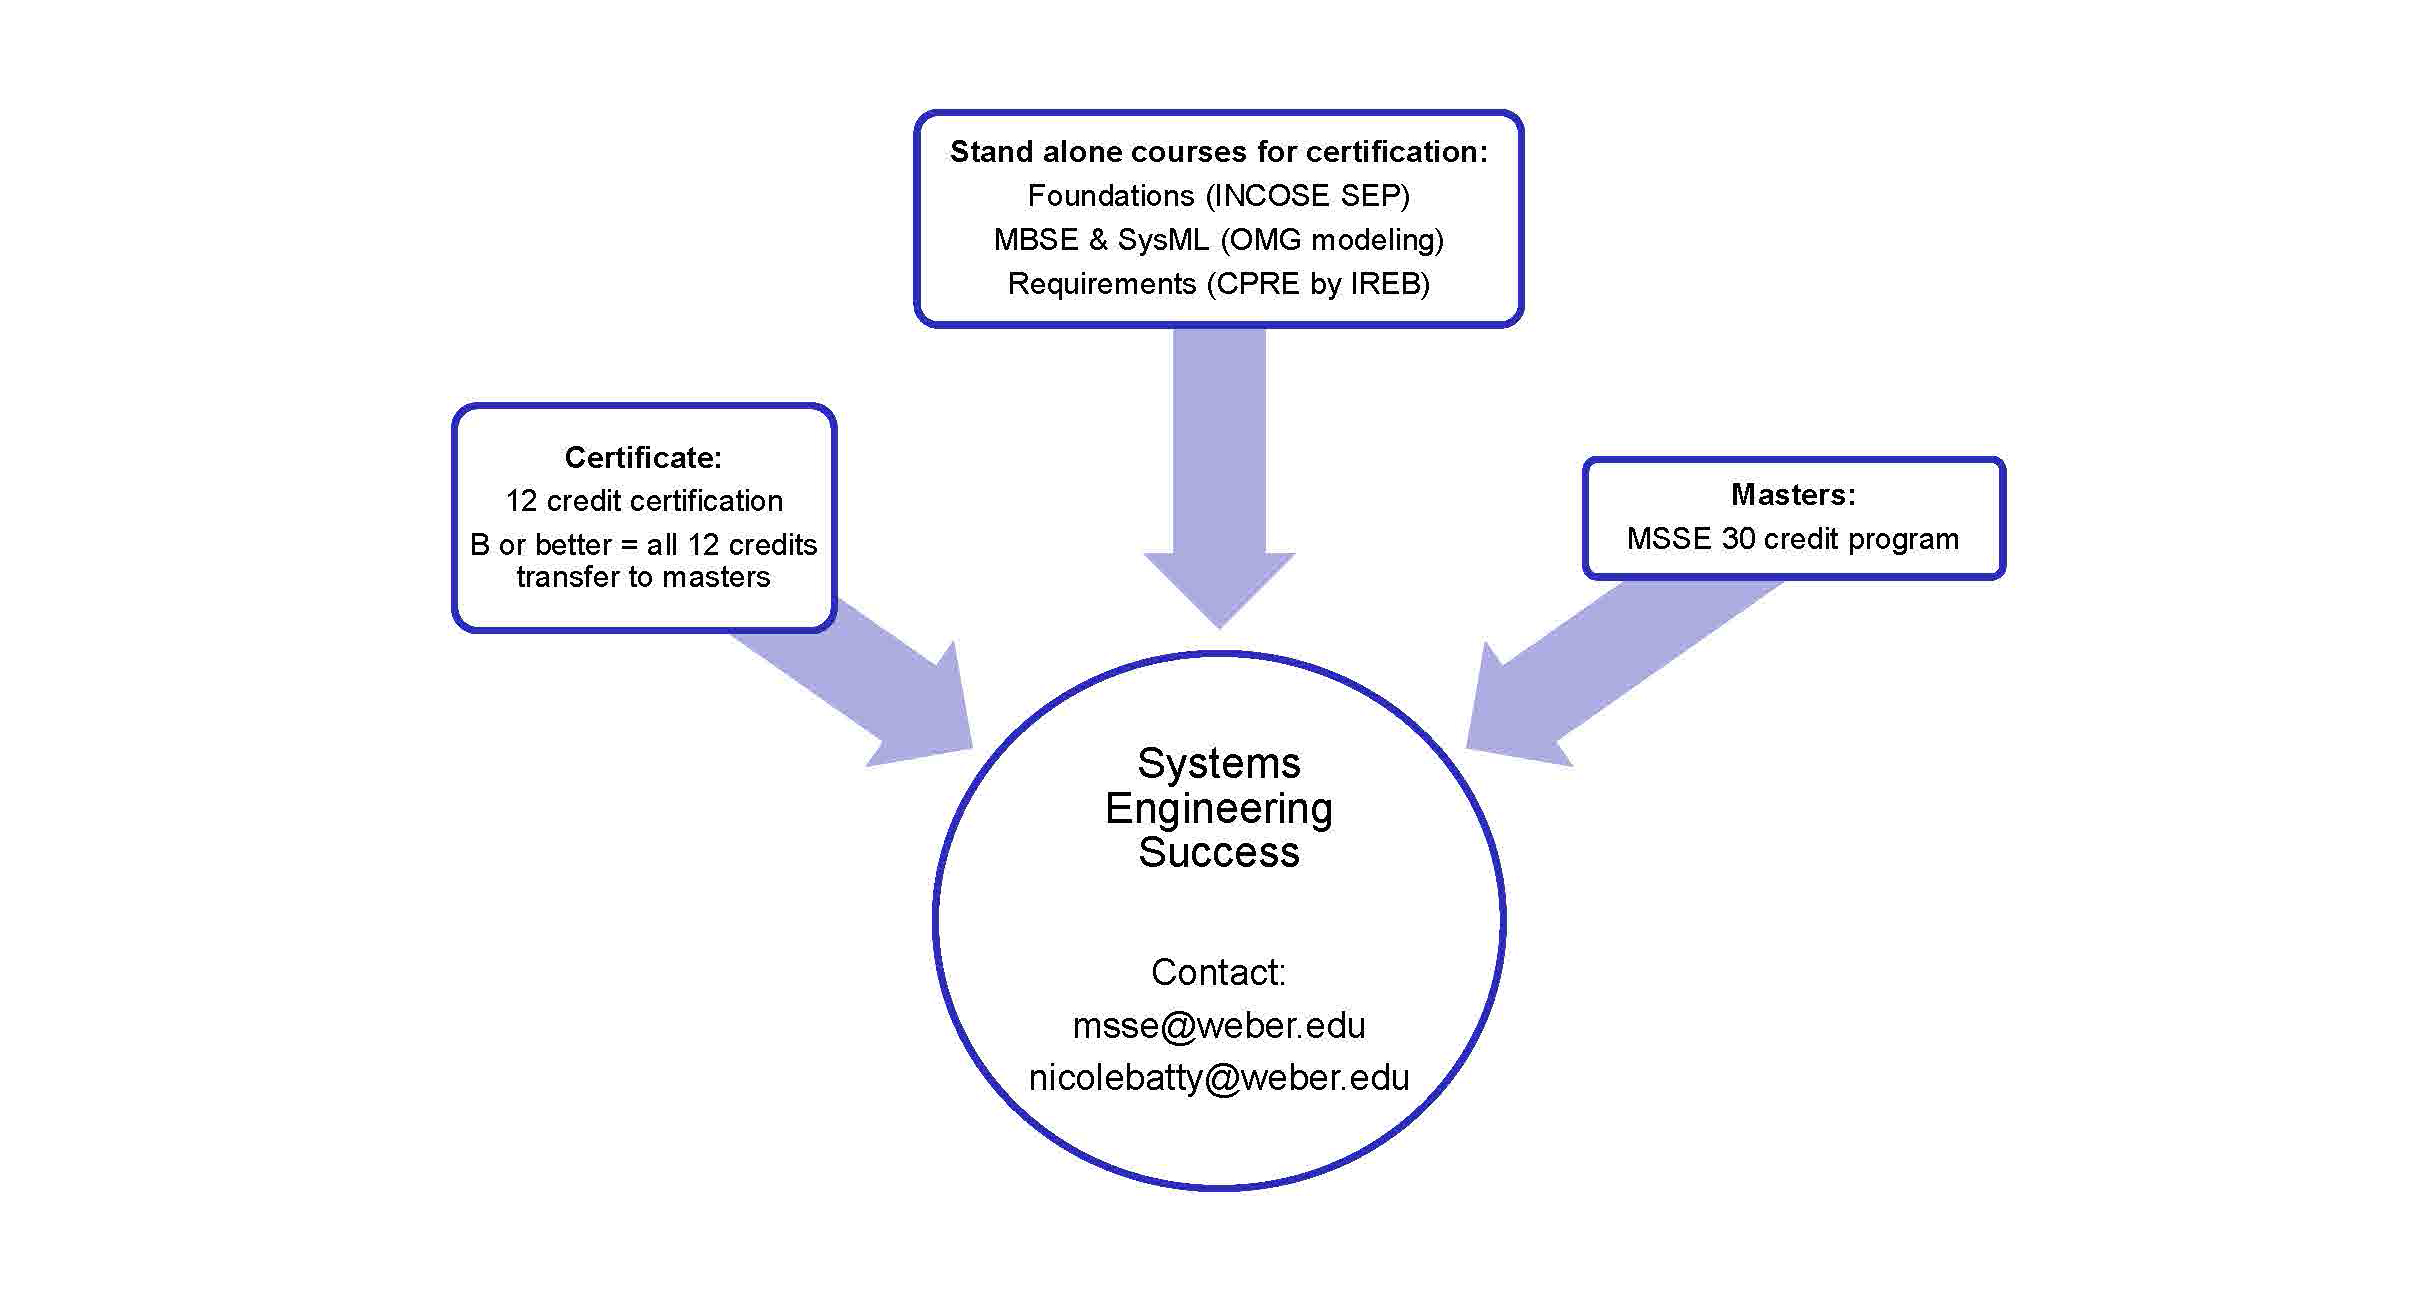 Certificate: 12 credit certificate B or better = all 12 credits transfer to masters  Stand alone courses for certiication:  Foundations (INCOSE SEP) MBSE & SysML (OMG modeling) Requirements 9CPRE by IREB)  Masters: MSSE 30 credit program